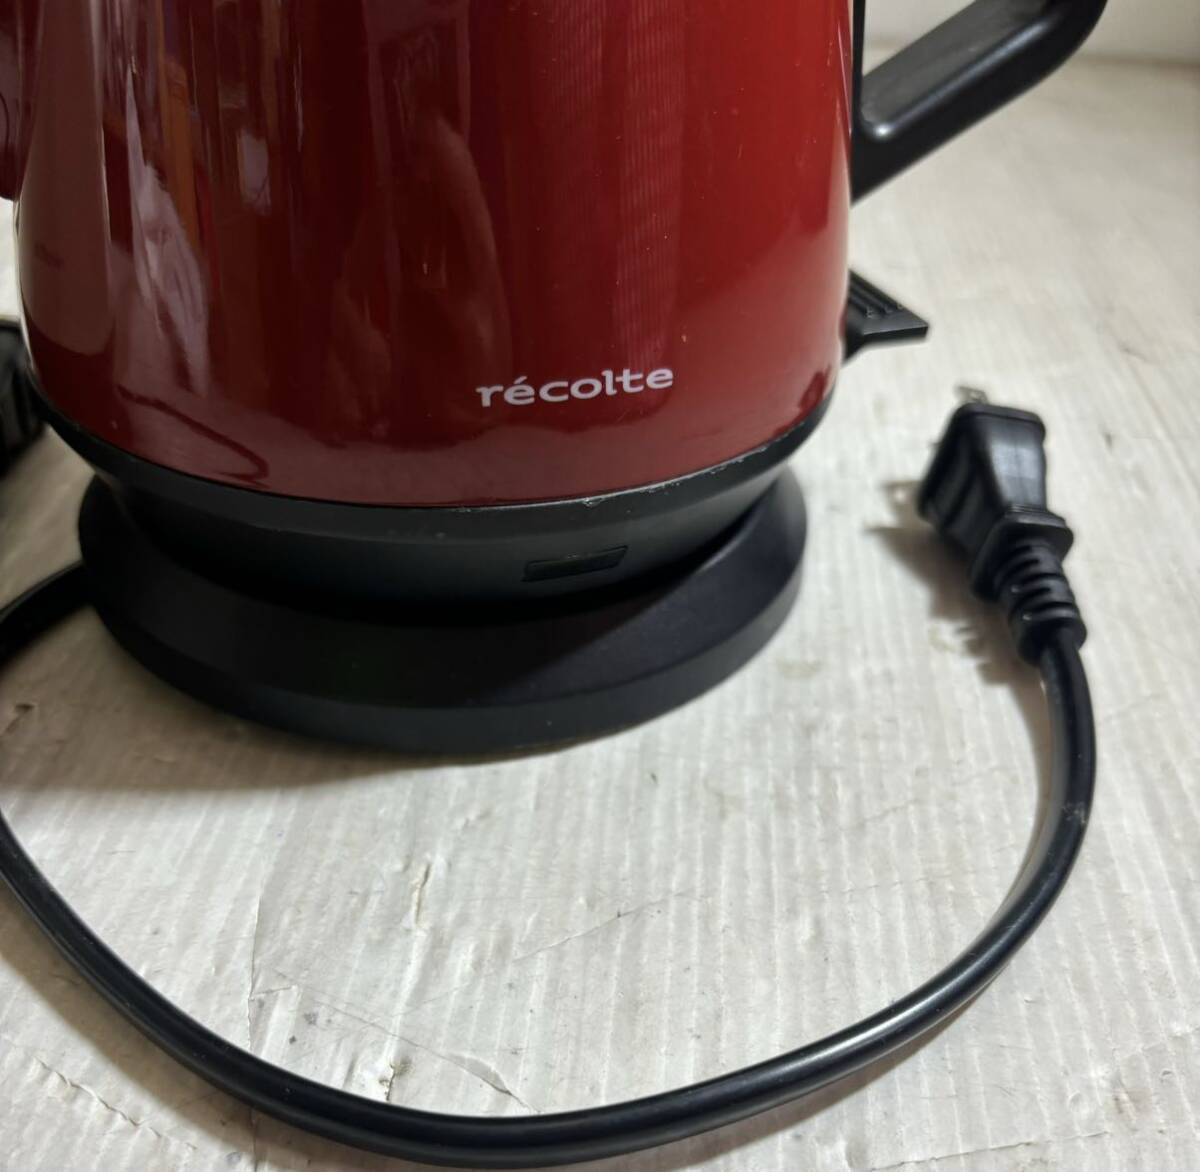 * cheap start! postage included!recolte Classic kettle Lee bruRCK-2re Colt 0.8 electric kettle Libre heat insulation pot *